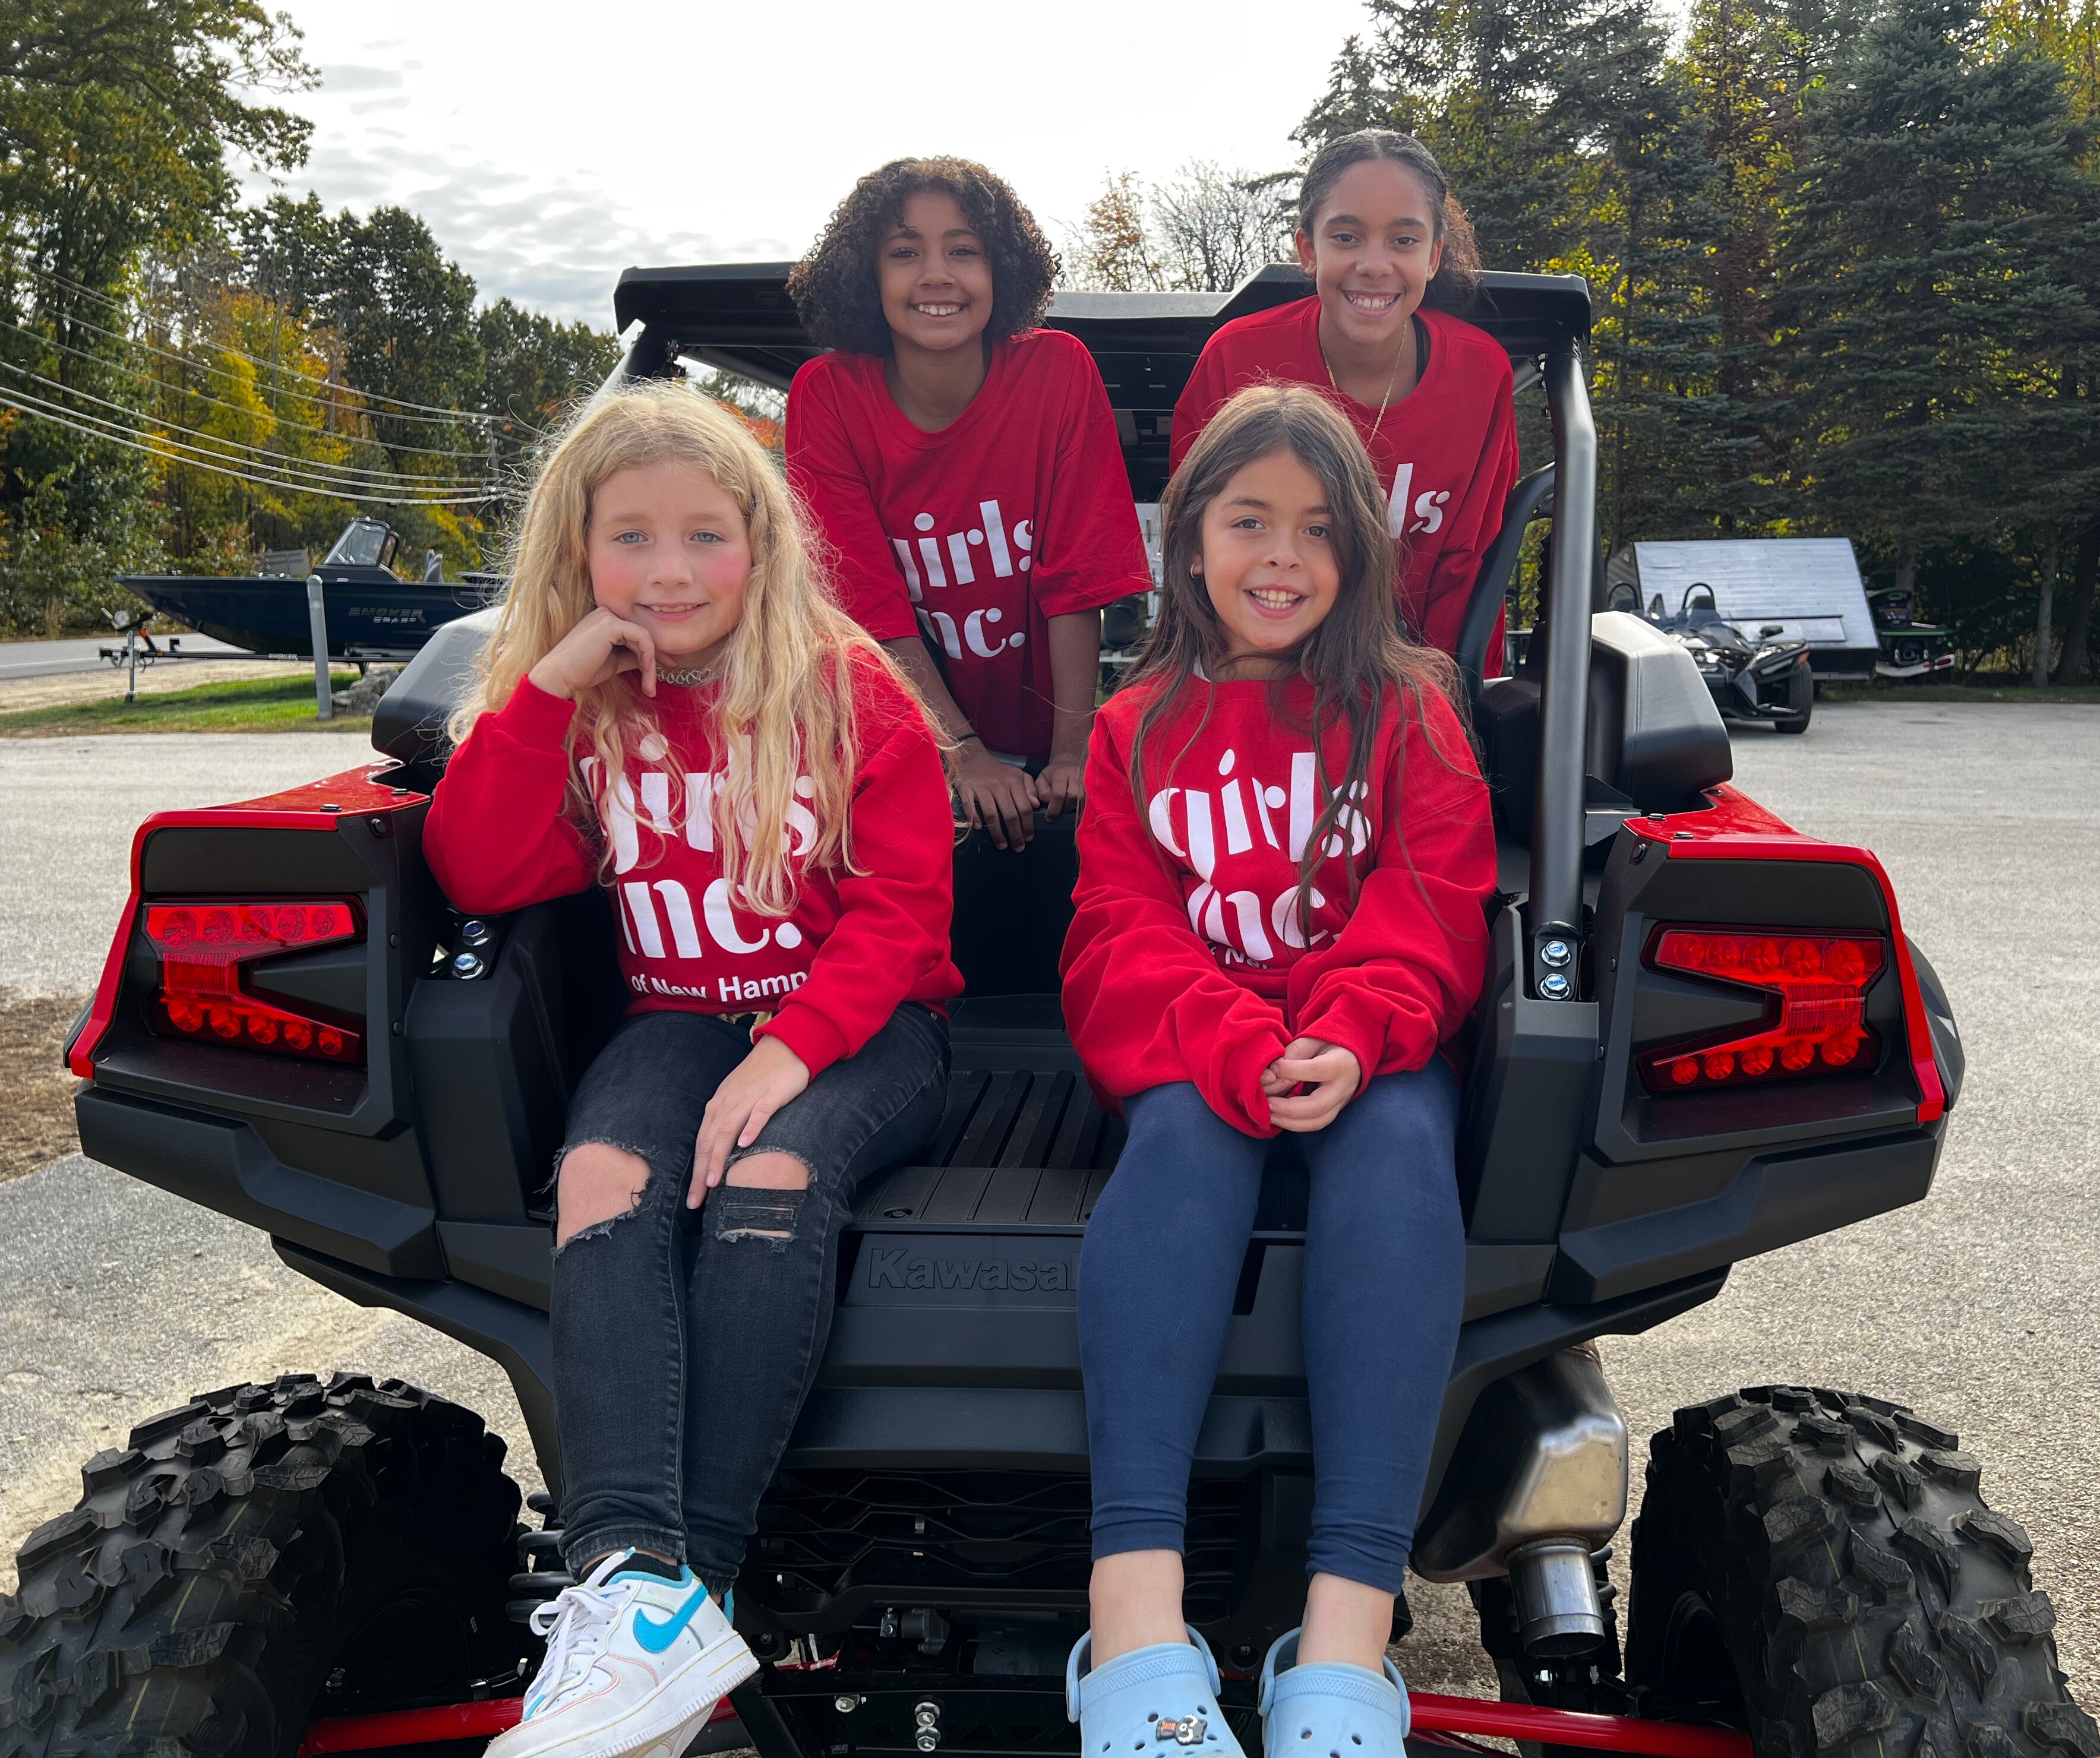 Embrace Adventure with Girls Inc. of New Hampshire’s “Strong, Smart & Bold Raffle”